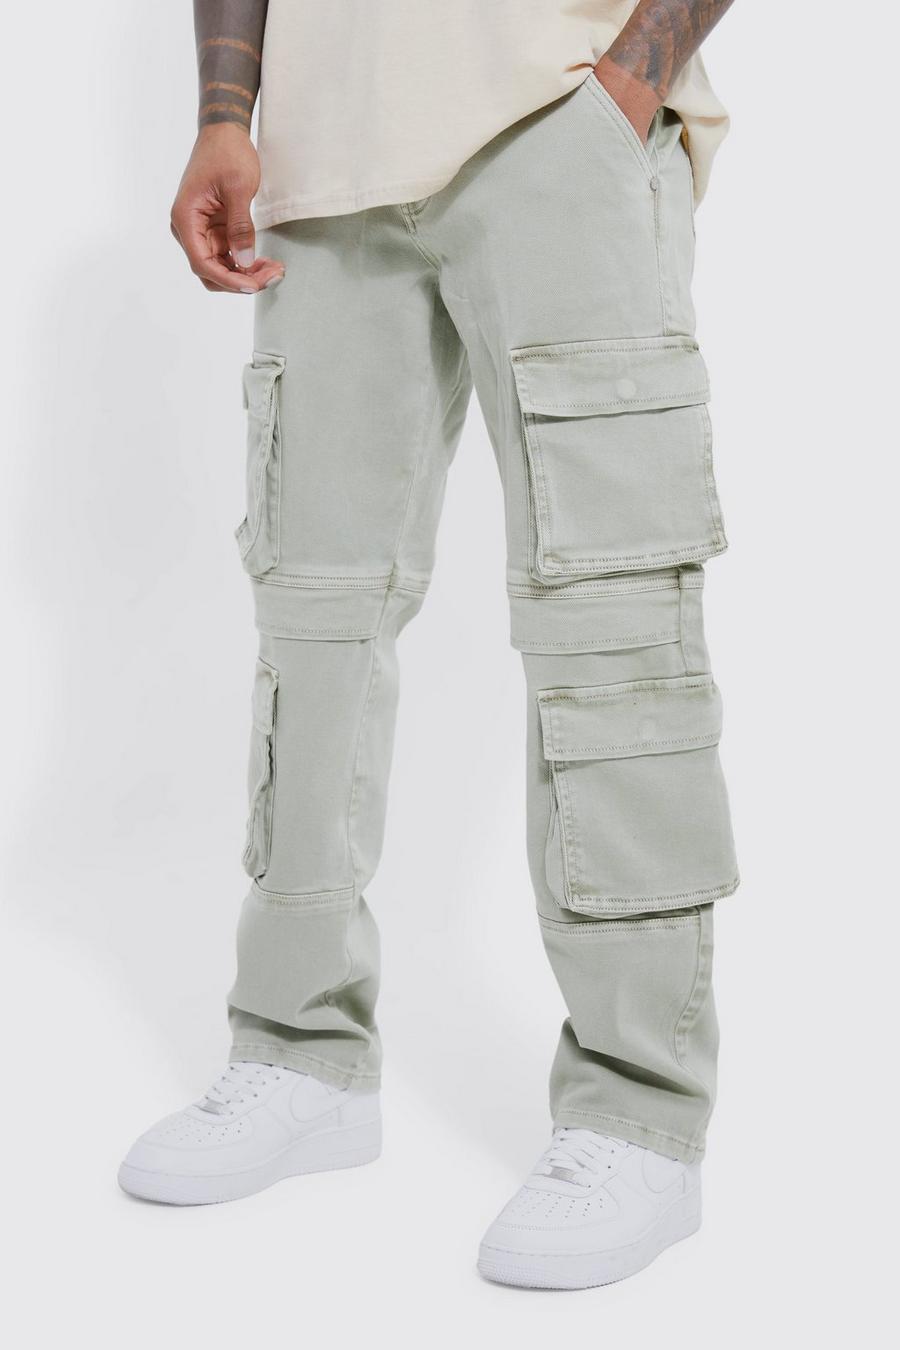 Sage grün Relaxed Fit Washed Multi Pocket Cargo Jeans